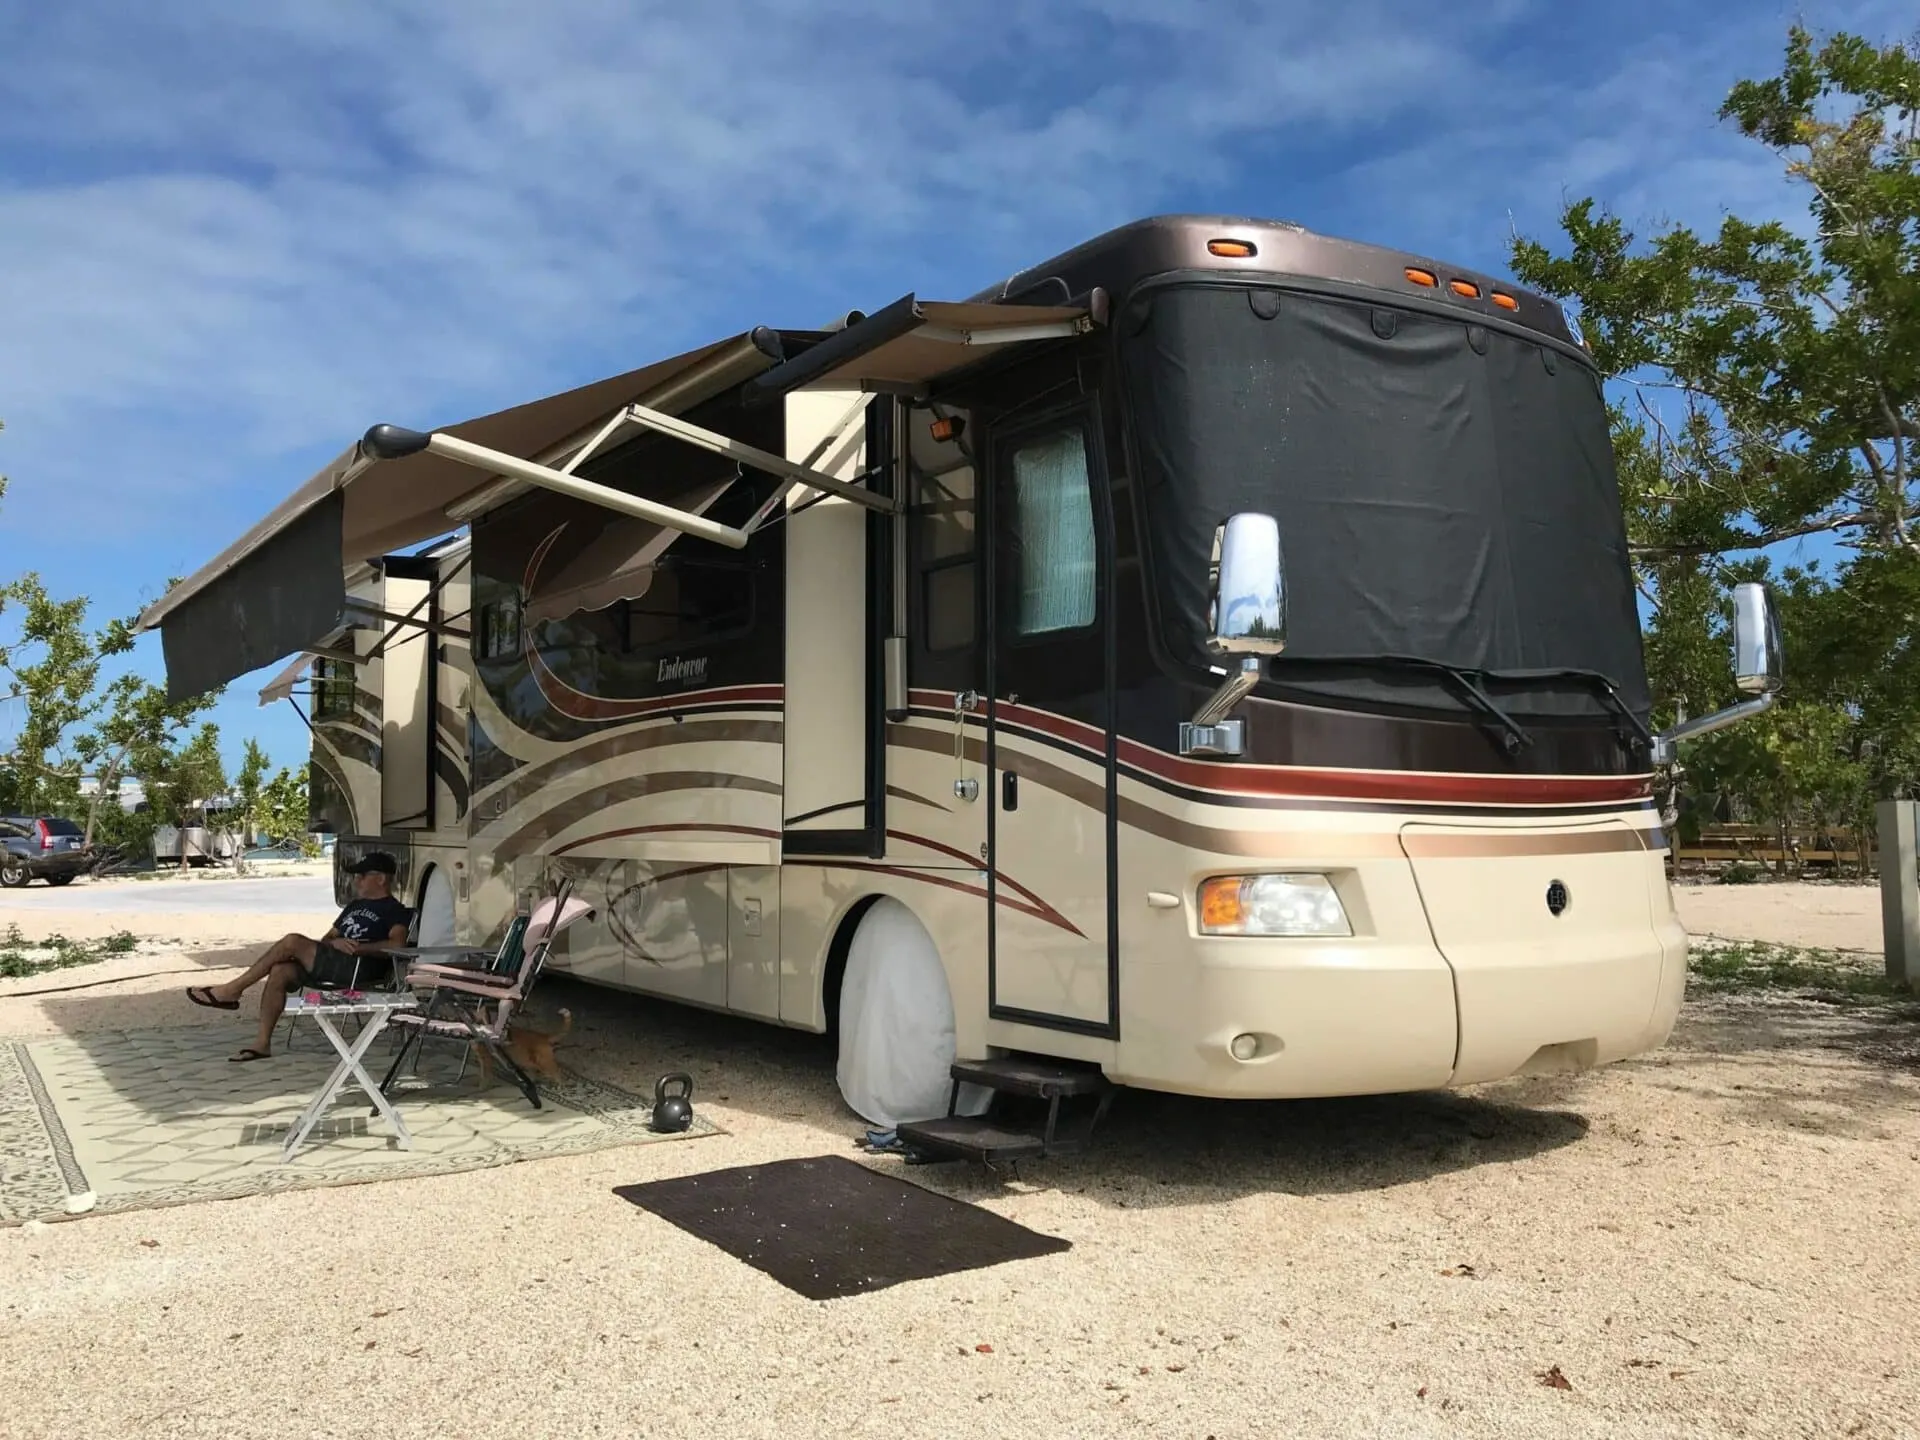 It's good to know how to get stains out of RV awnings before they accumulate.